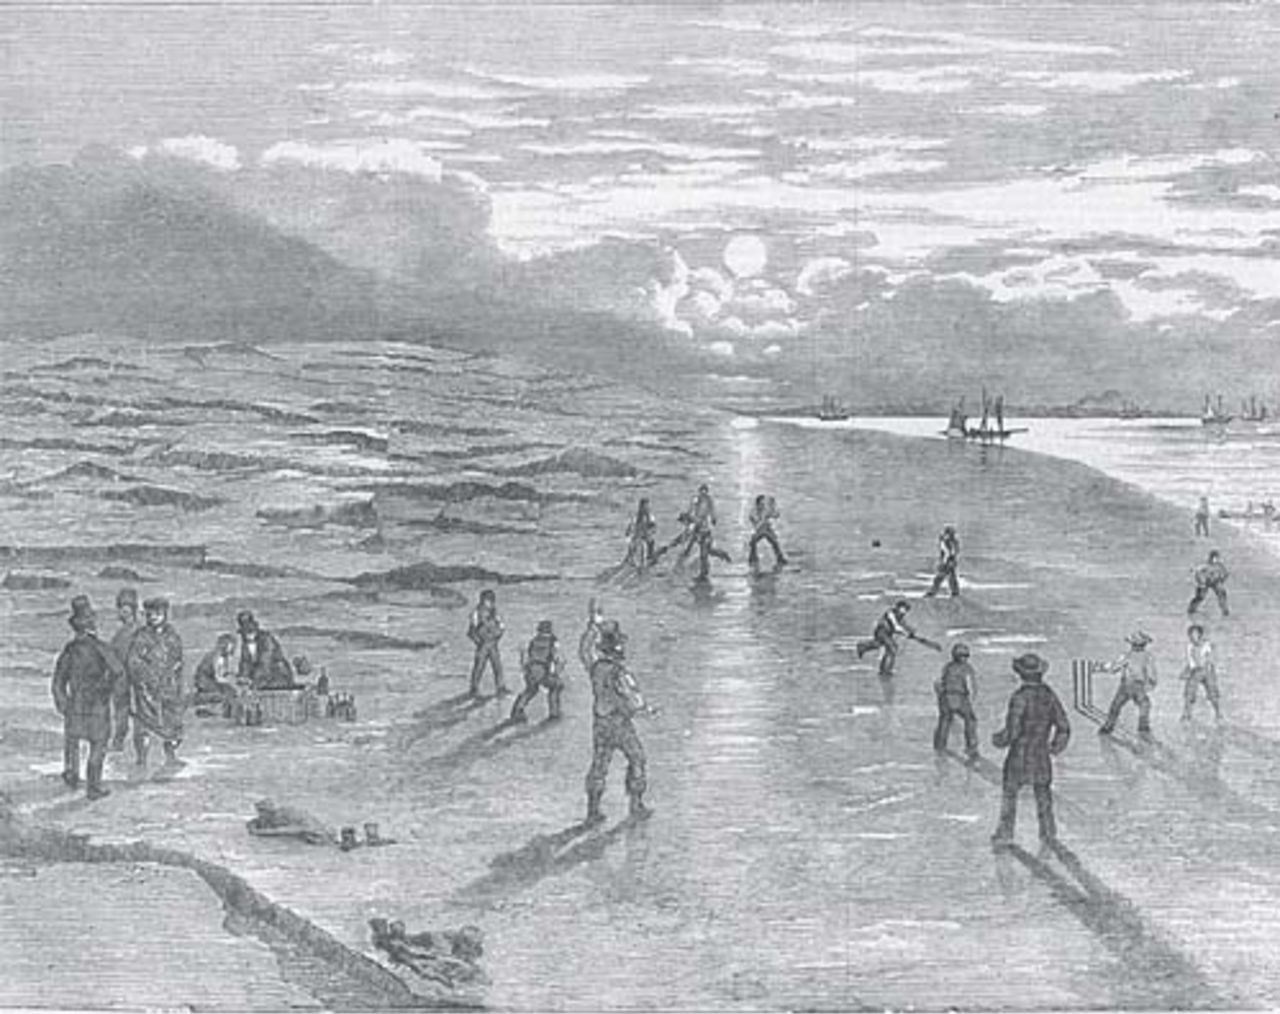 An image from <i>Illustrated London News</i> recording a match on Goodwin Sands in 1919